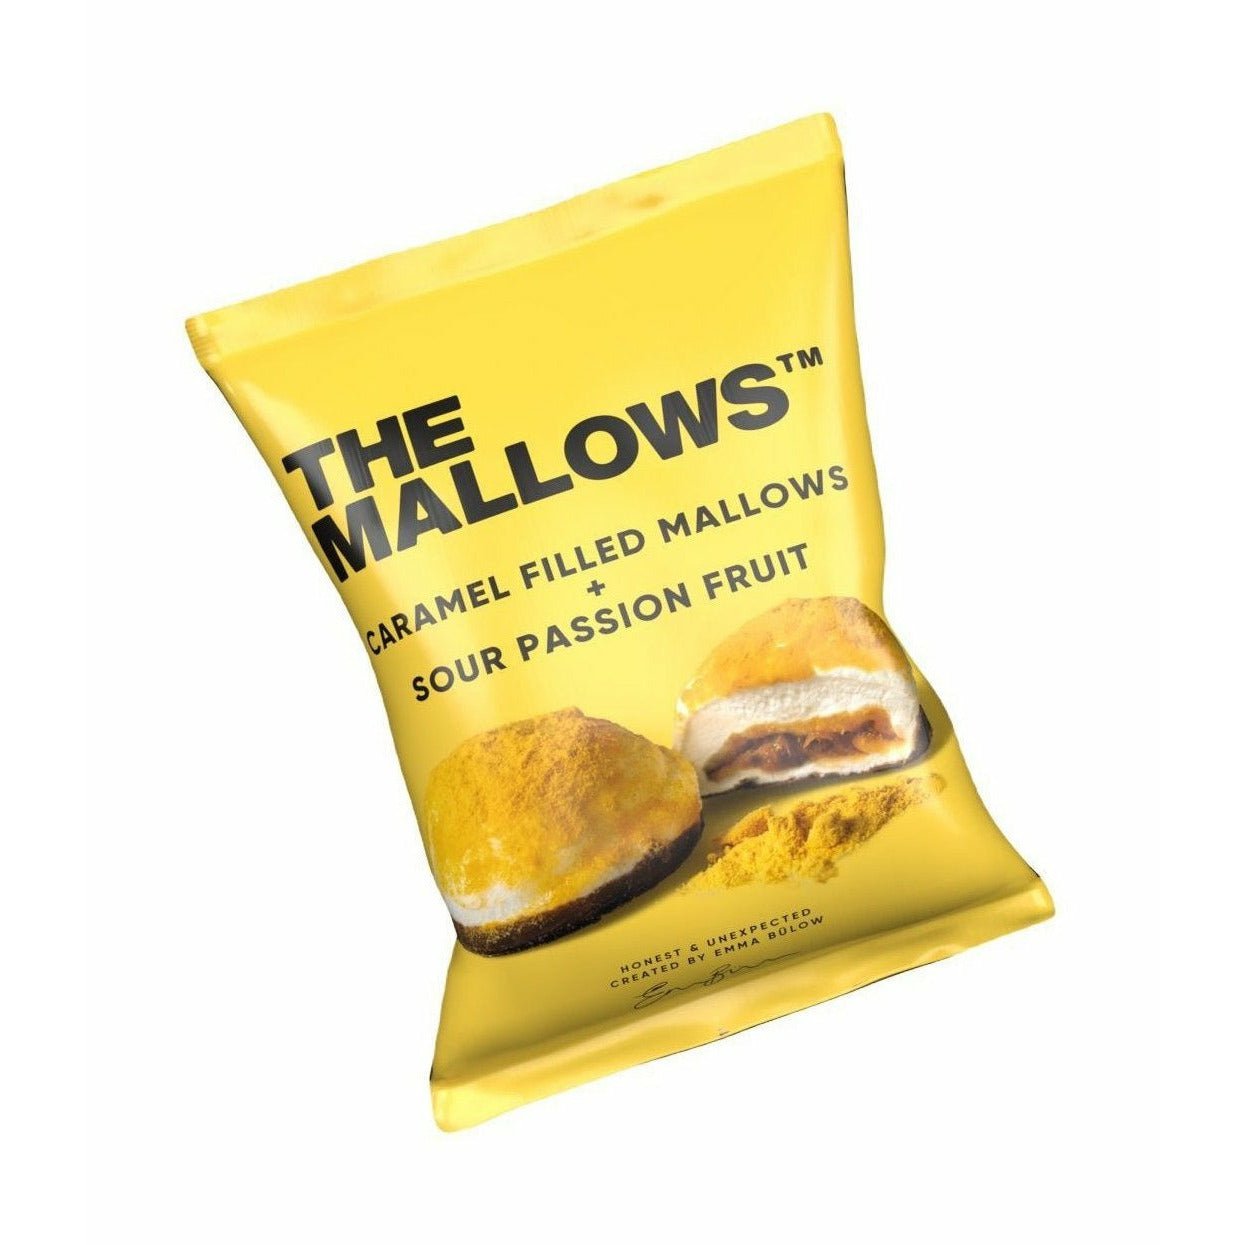 The Mallows Marshmallows With Caramel Filling Sour Passion Fruit, 11g